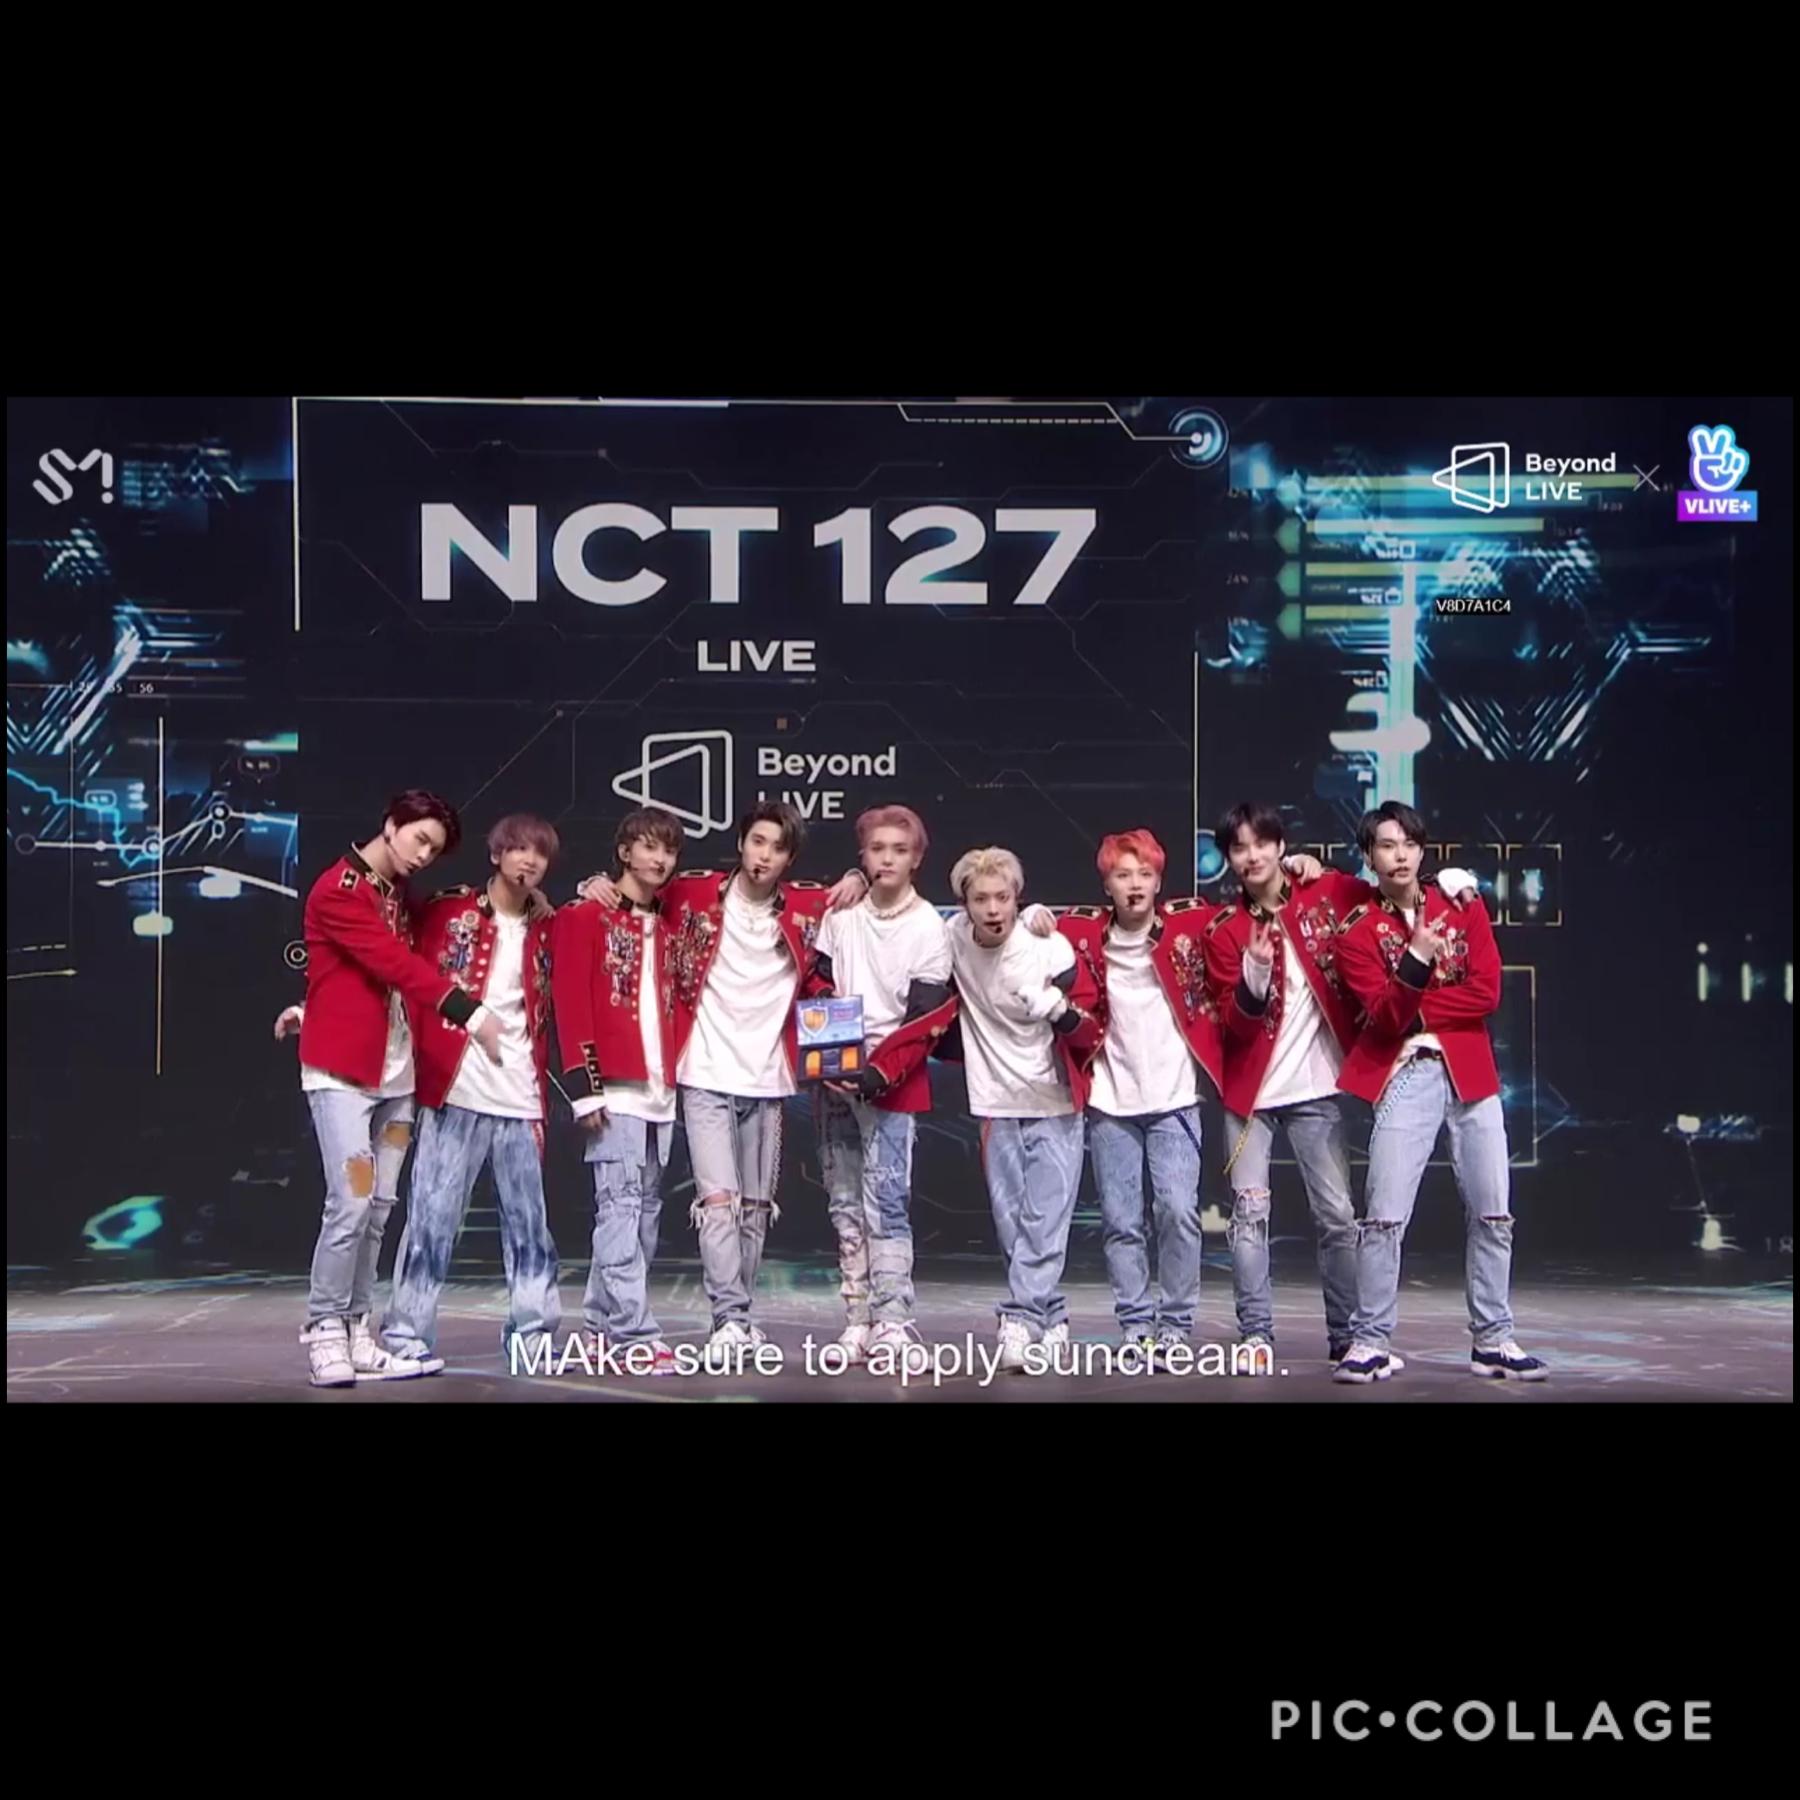 💚 ᴛᴀᴘ 💚
Did anybody else saw NCT 127’s beyond live presentation? 
I’m falling asleep but now I’m waiting the MV teaser for 'Punch' I want to sleep help. 